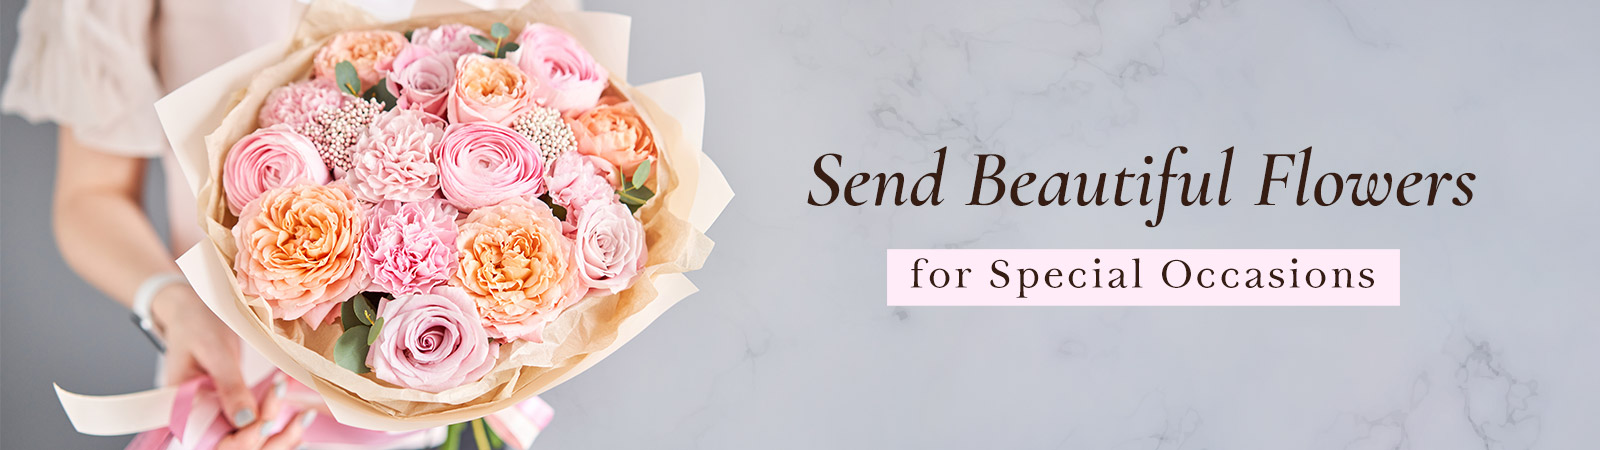 Top 10 Best Flower Delivery Services in KL and Selangor